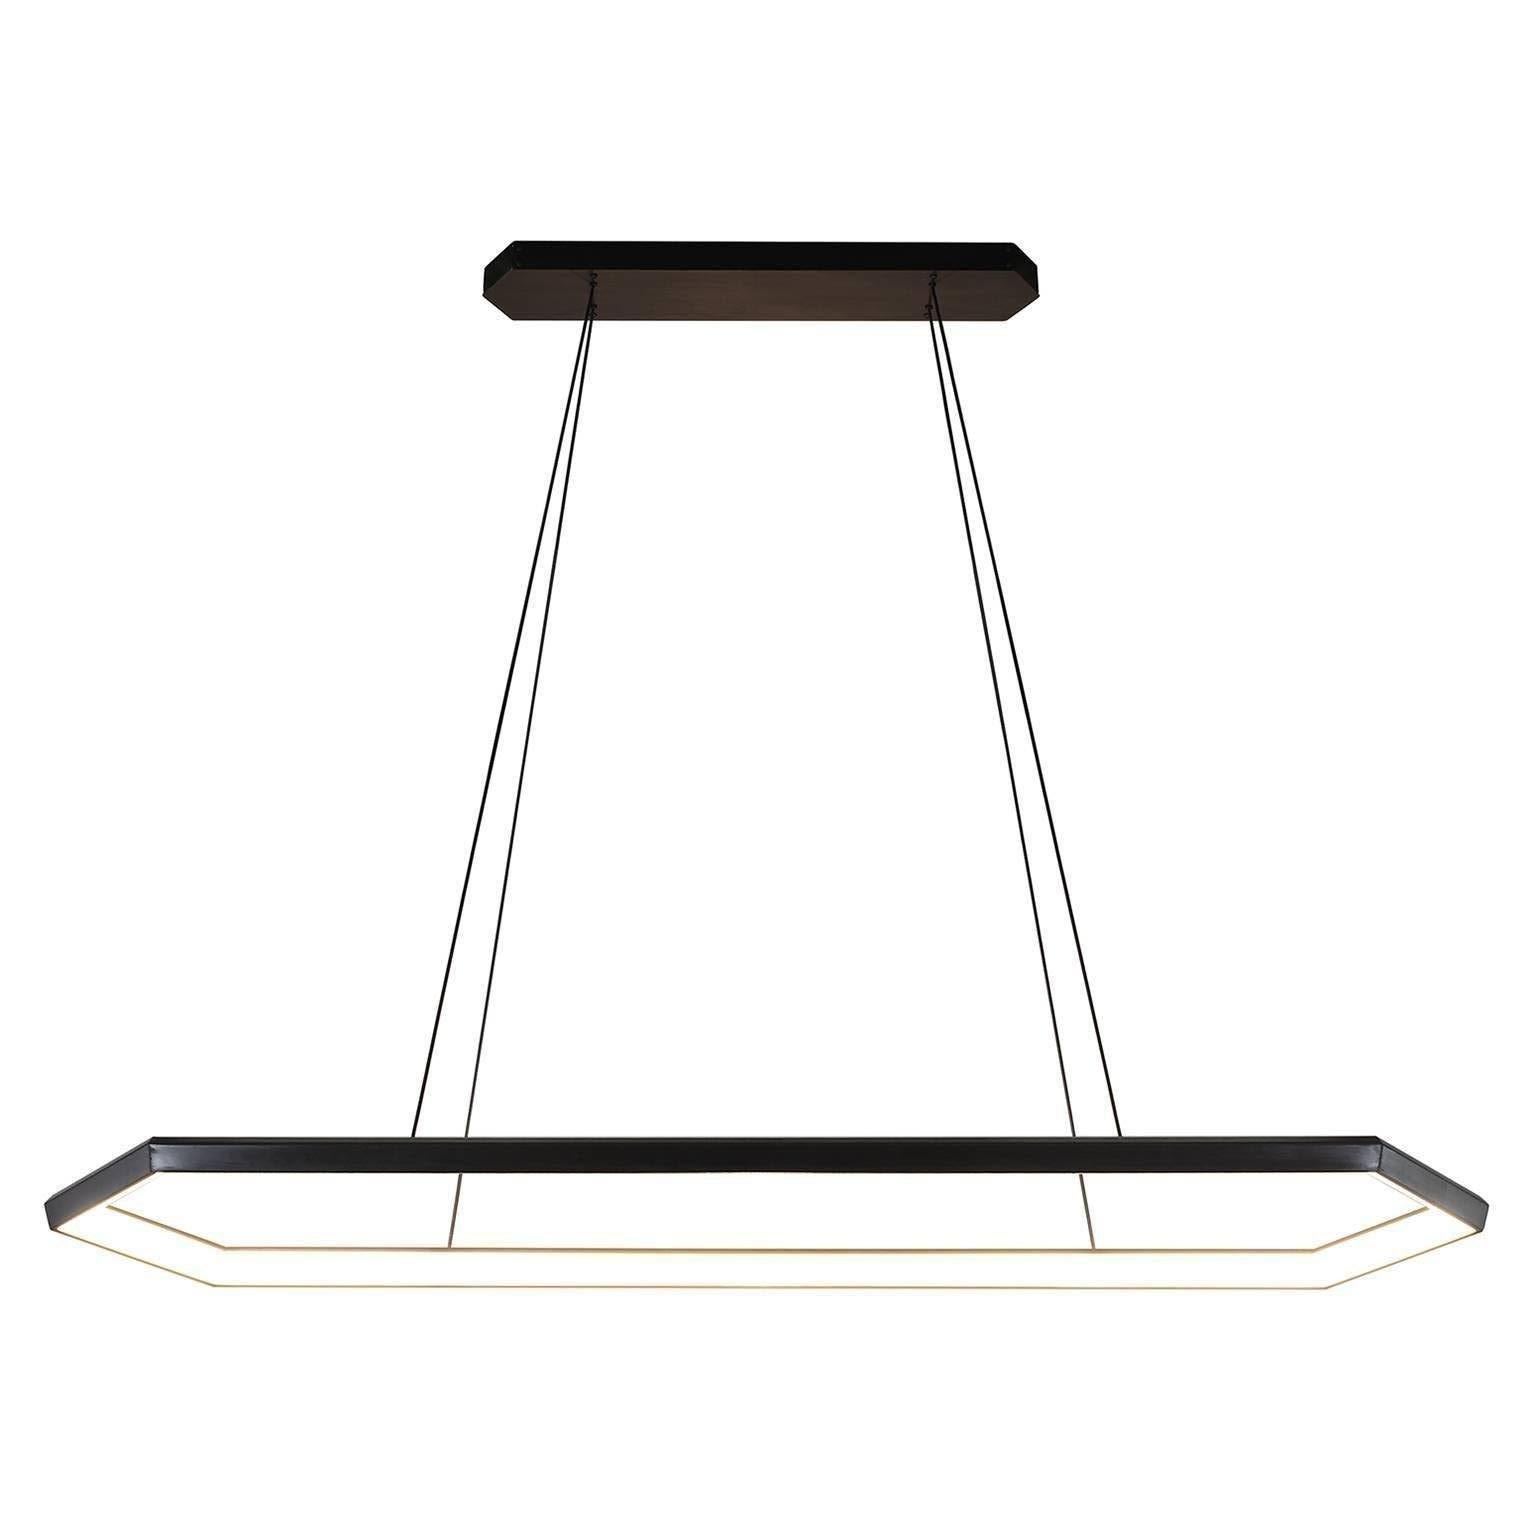 Kruos LX58 has an elongated hexagonal form that provides a wide beam of light, perfect for adeptly illuminating workspaces, kitchens, and offices.

Metal finish
Powder-coat finish available in Metallic Brass, Metallic Gold, Metallic Nickel, Metallic